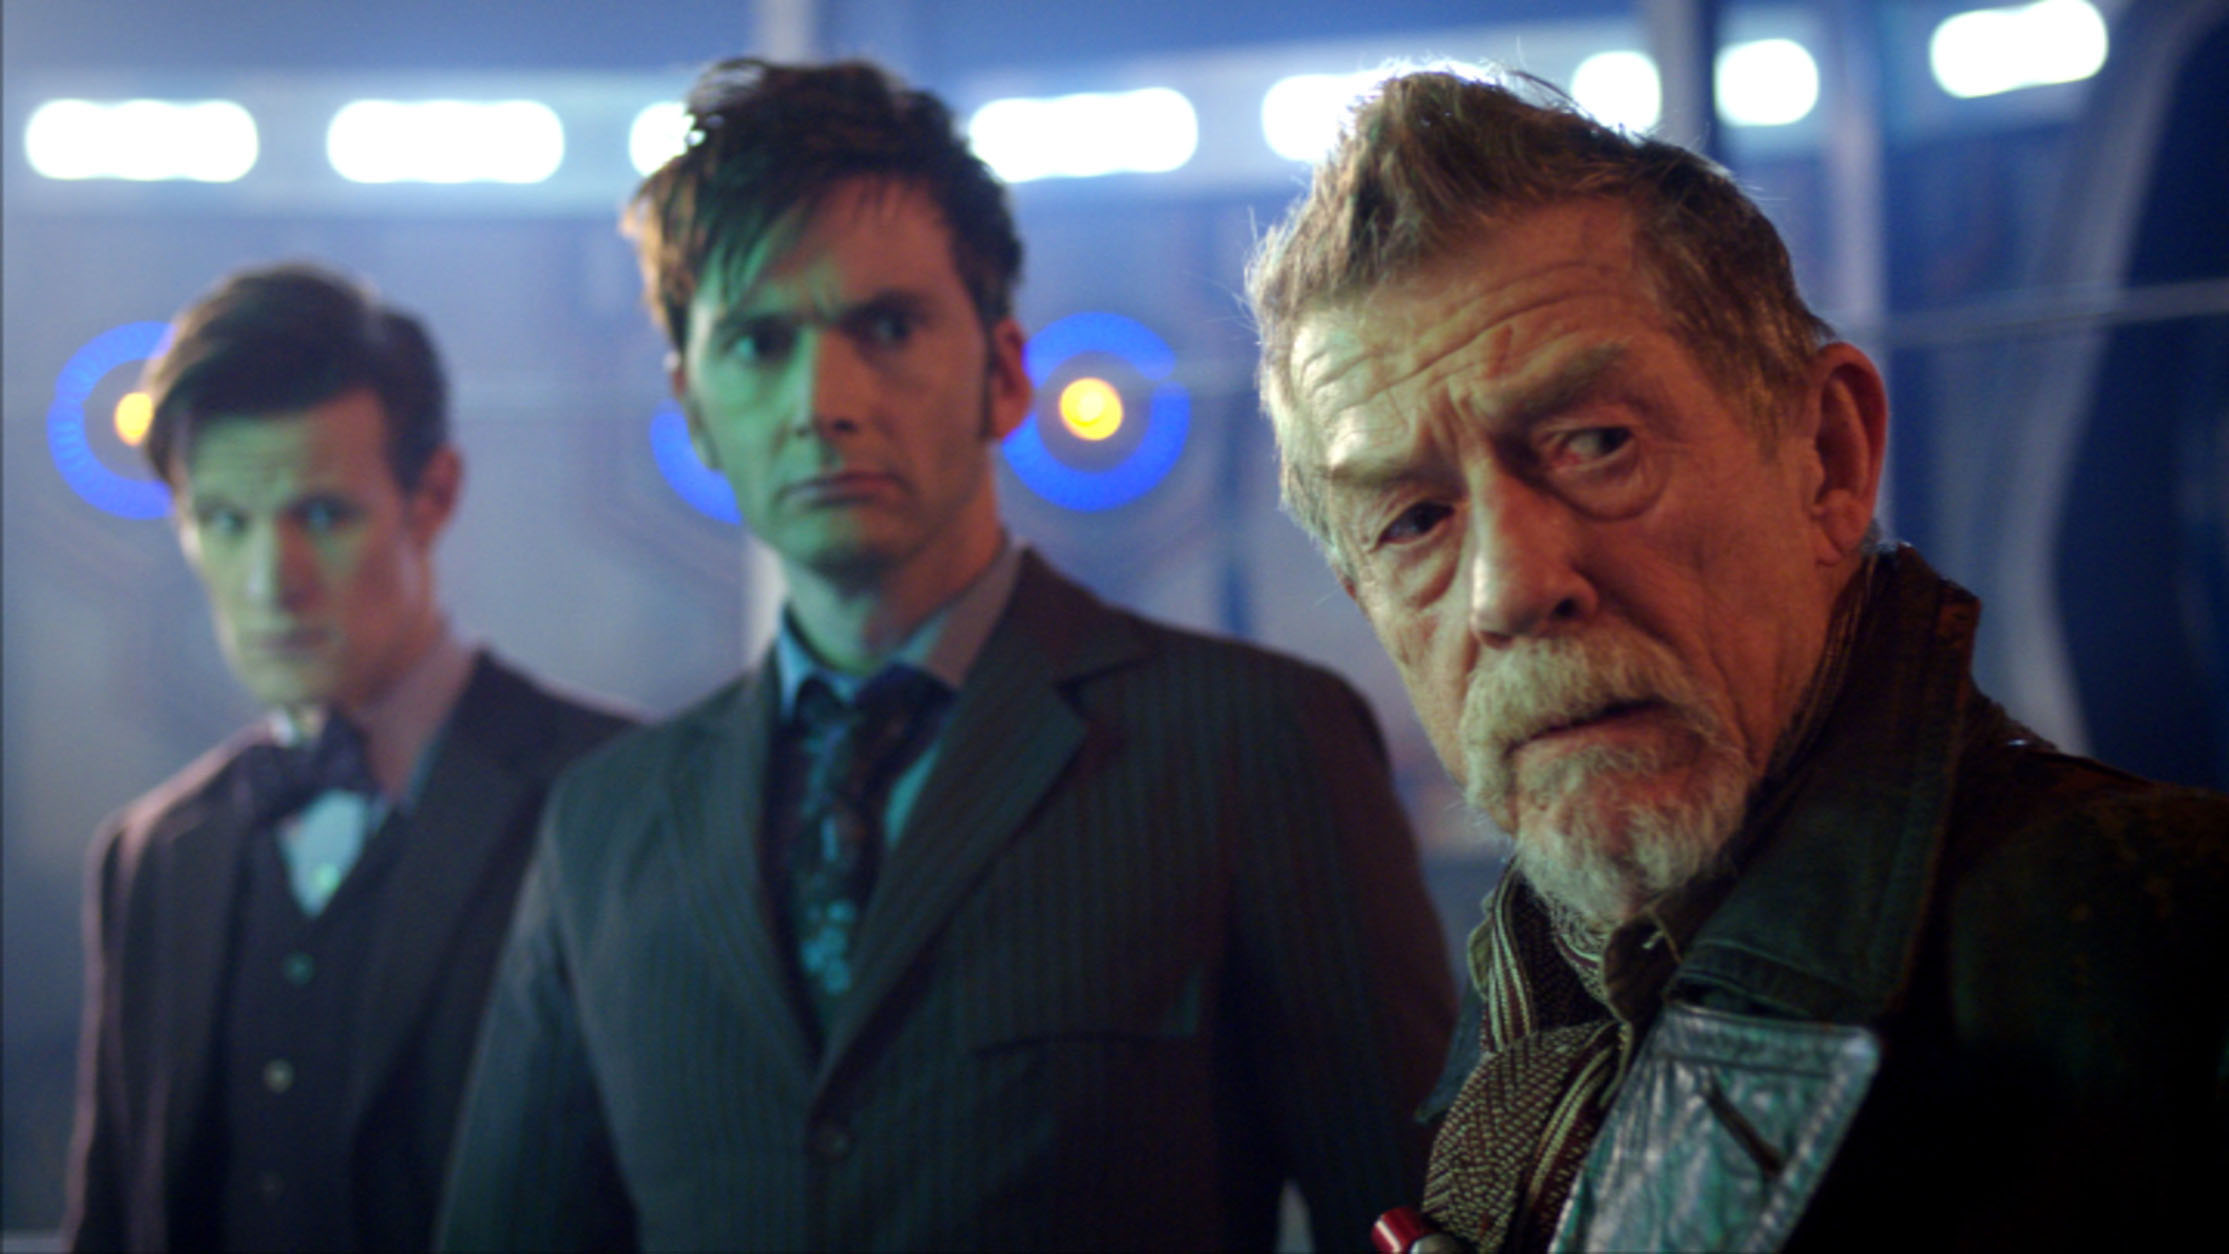 Review: Doctor Who 50th Anniversary “Day of the Doctor”